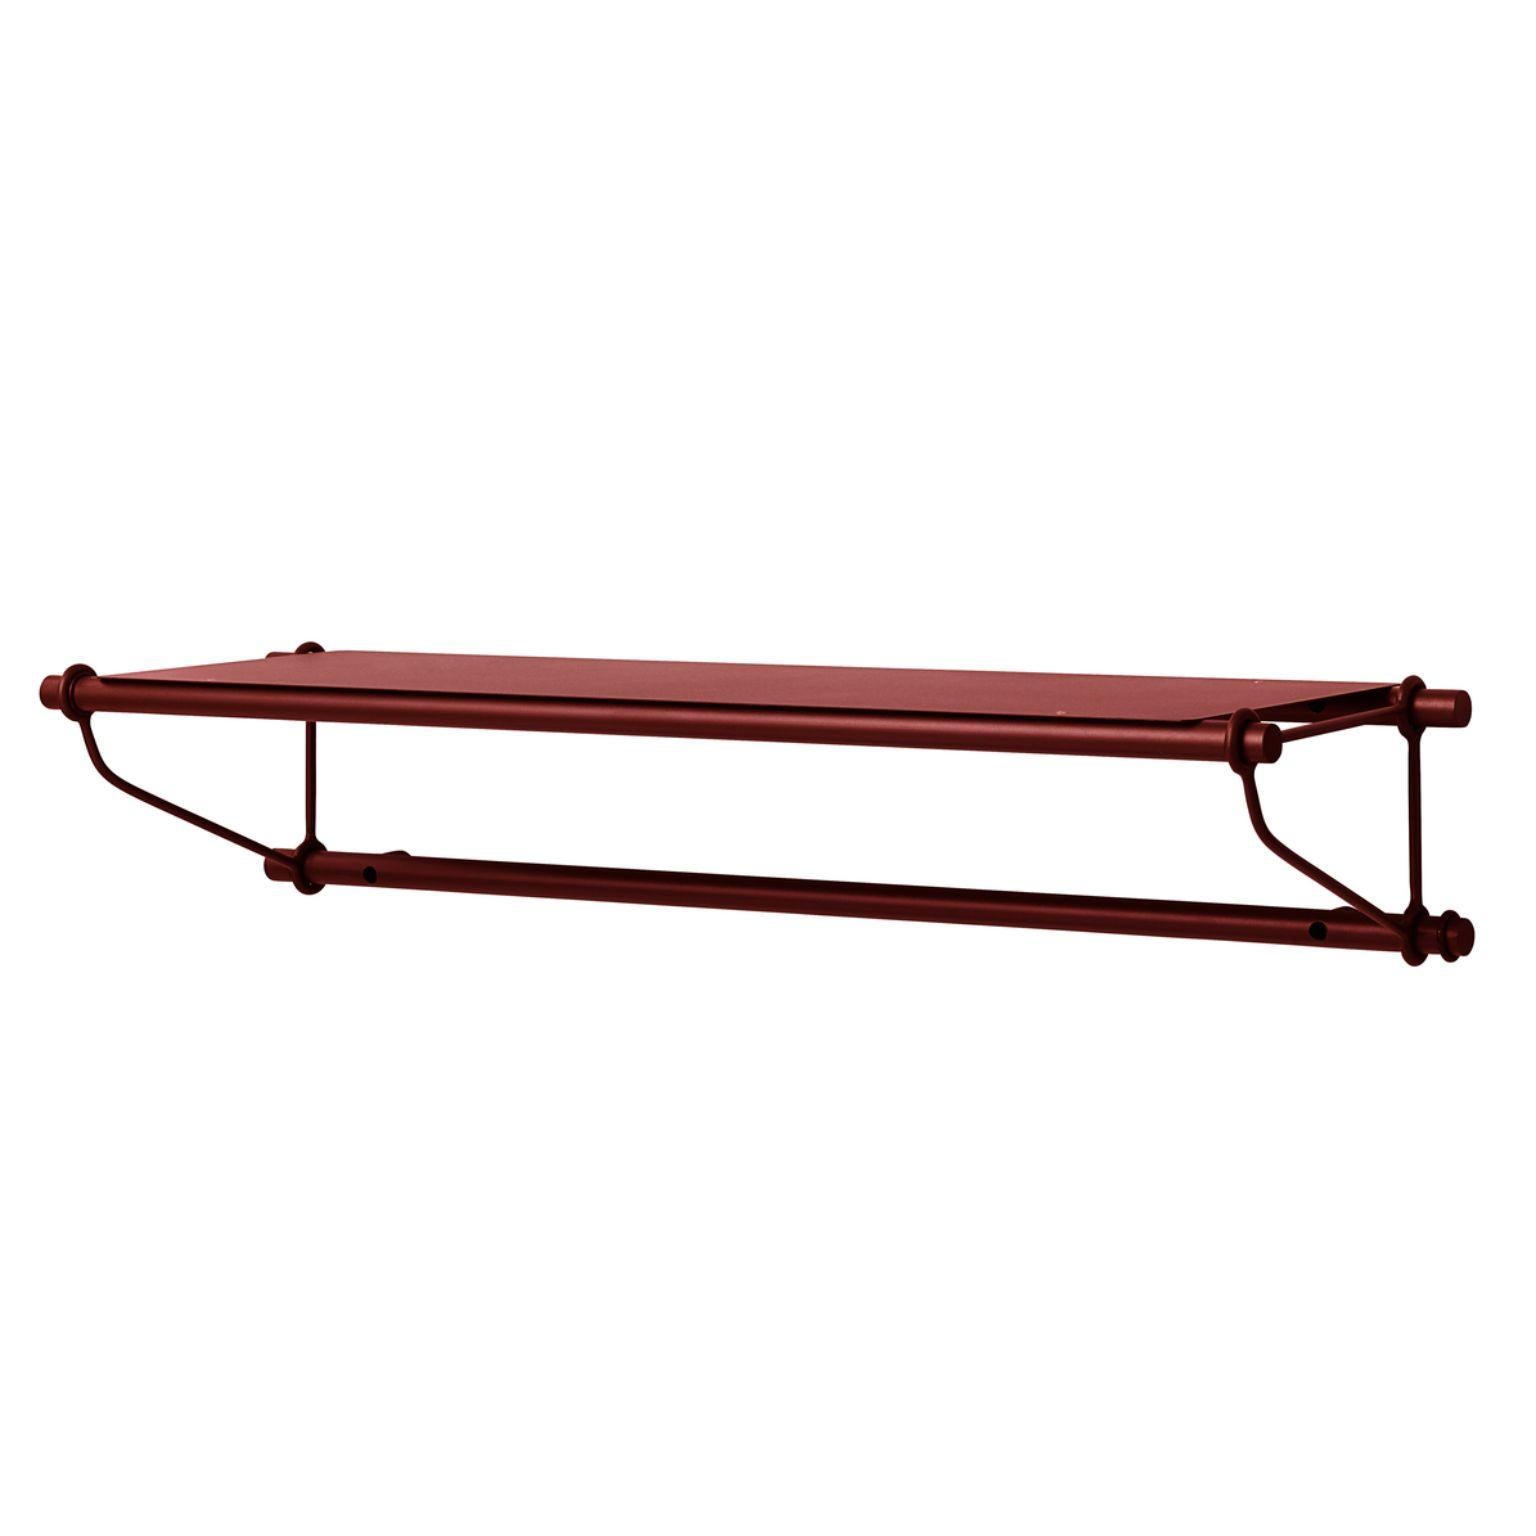 Post-Modern Parade 1 Shelf Top Oxide Red by Warm Nordic For Sale